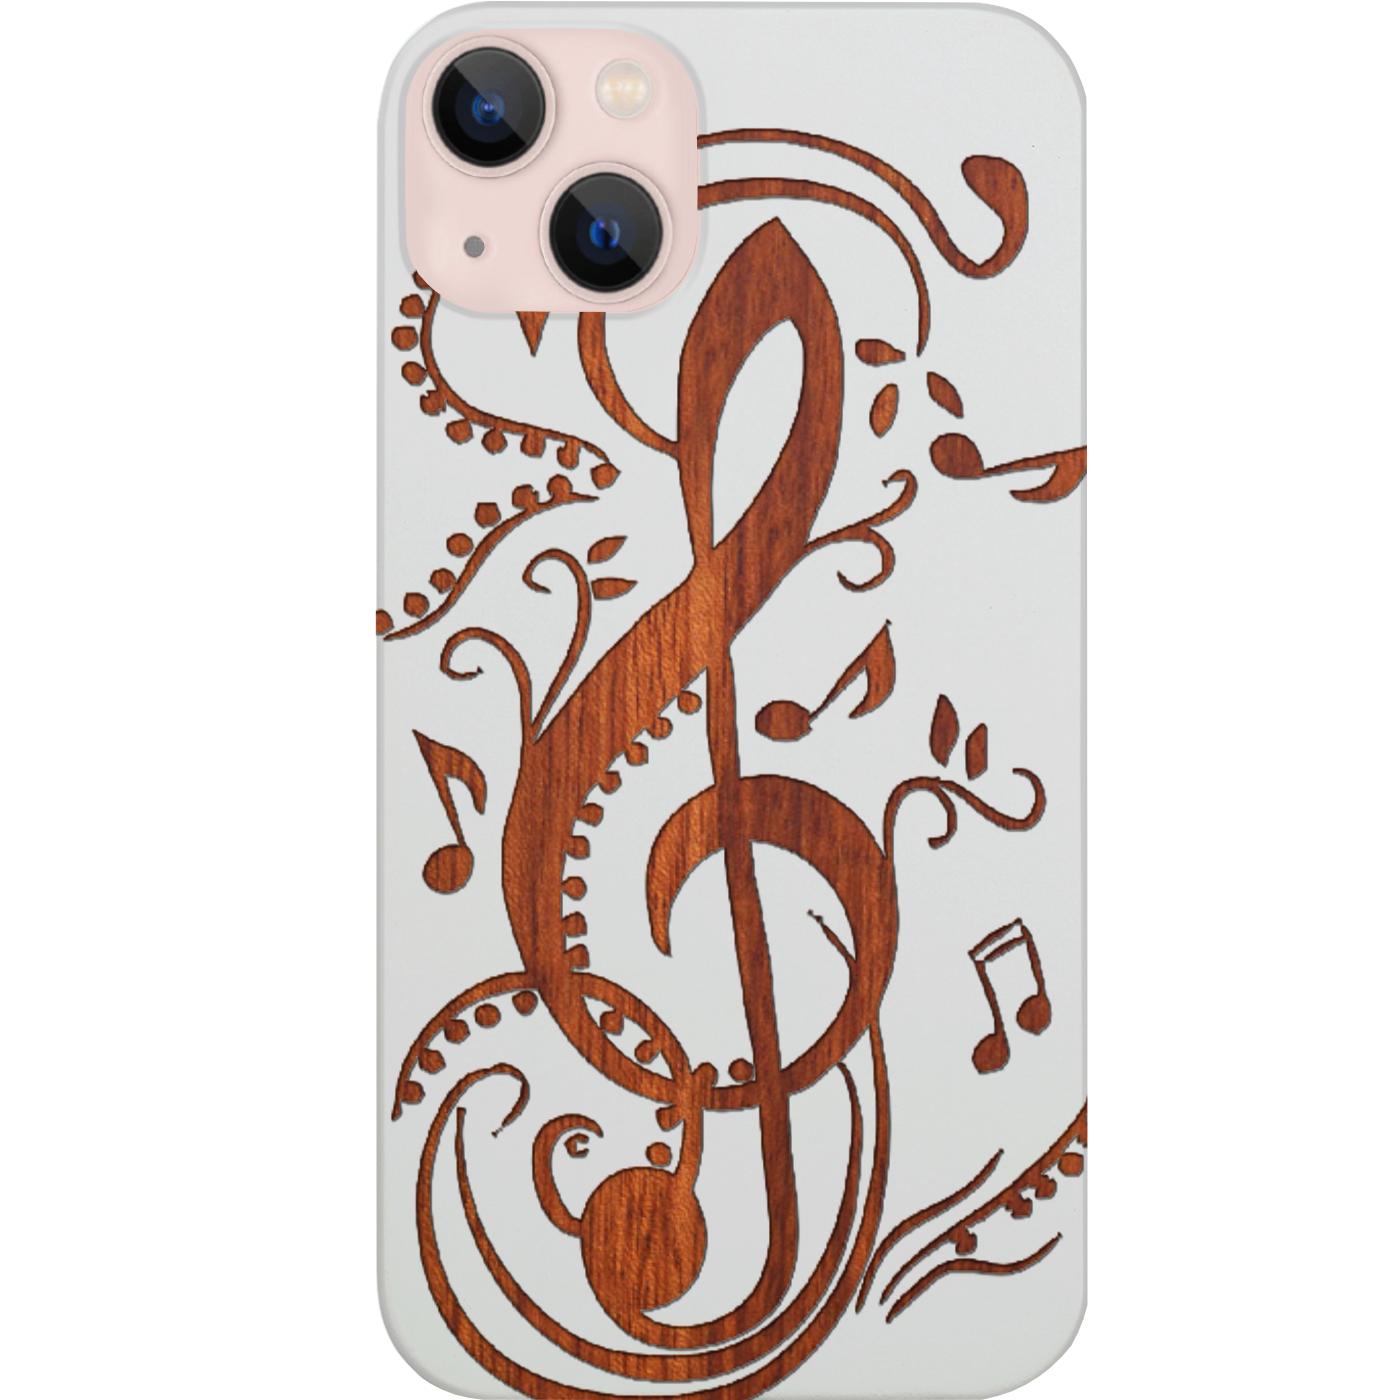 Clef 1 - Engraved Phone Case